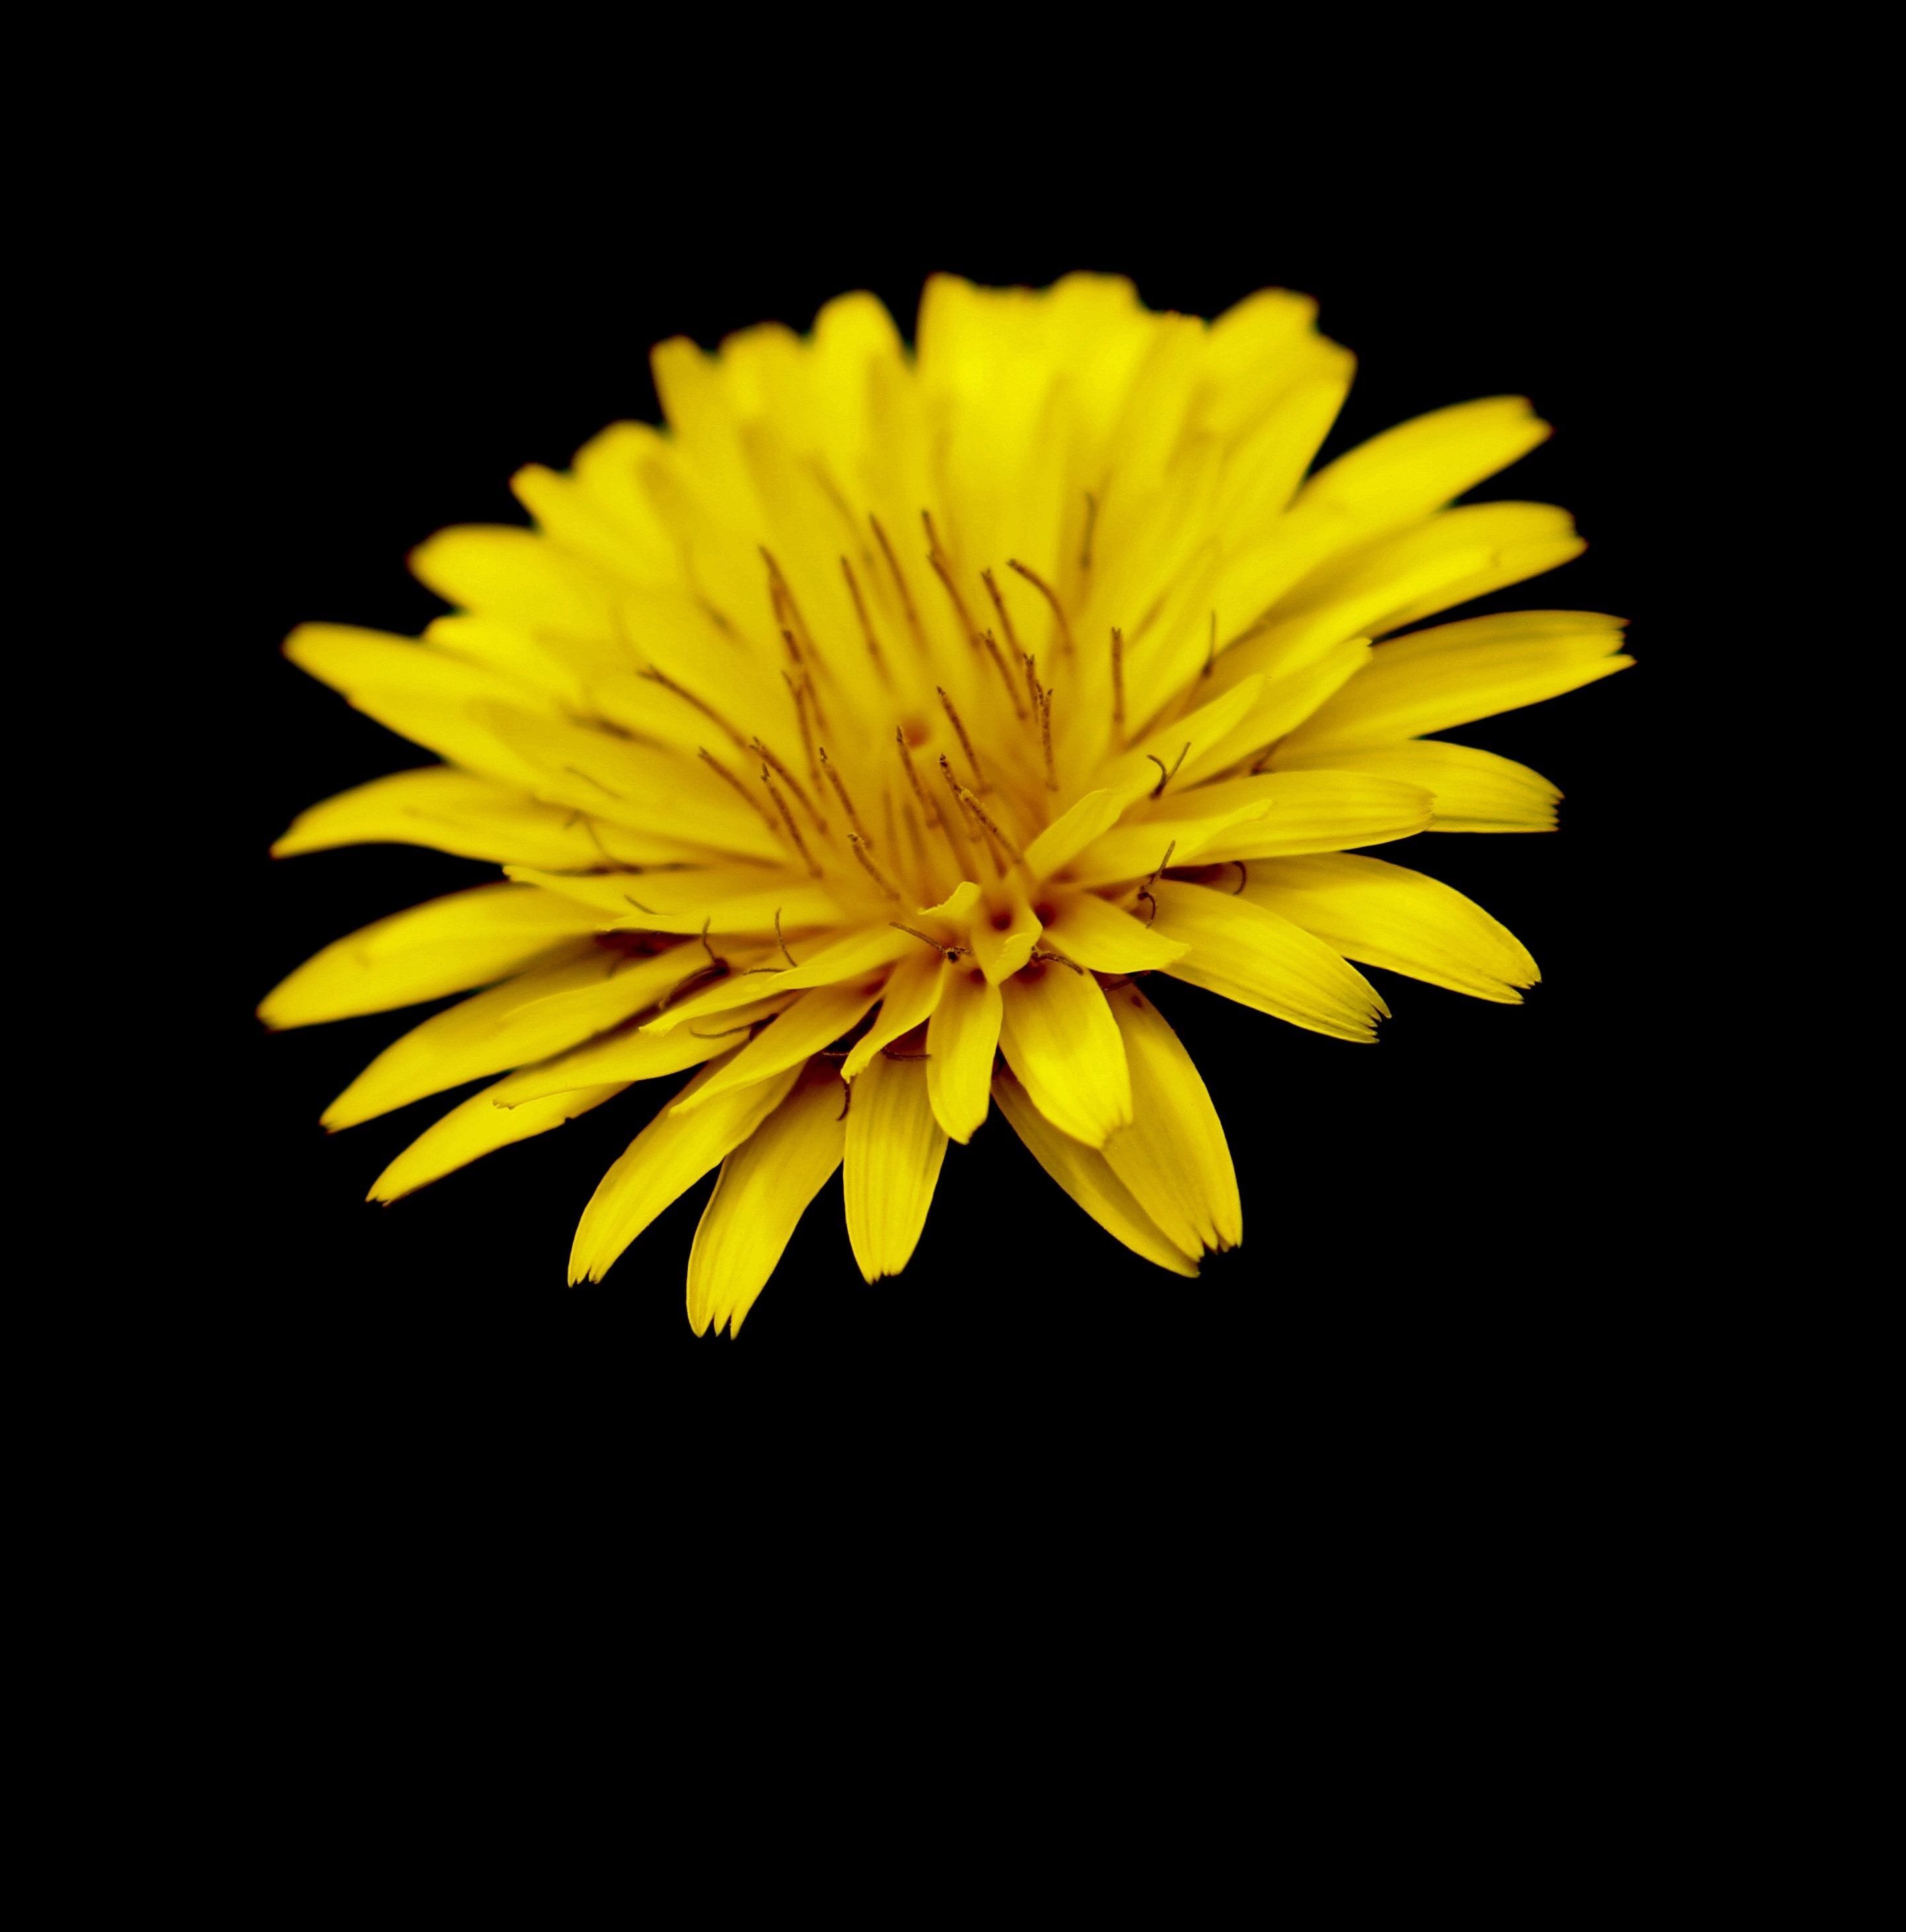 yellow petaled flower in close up photo